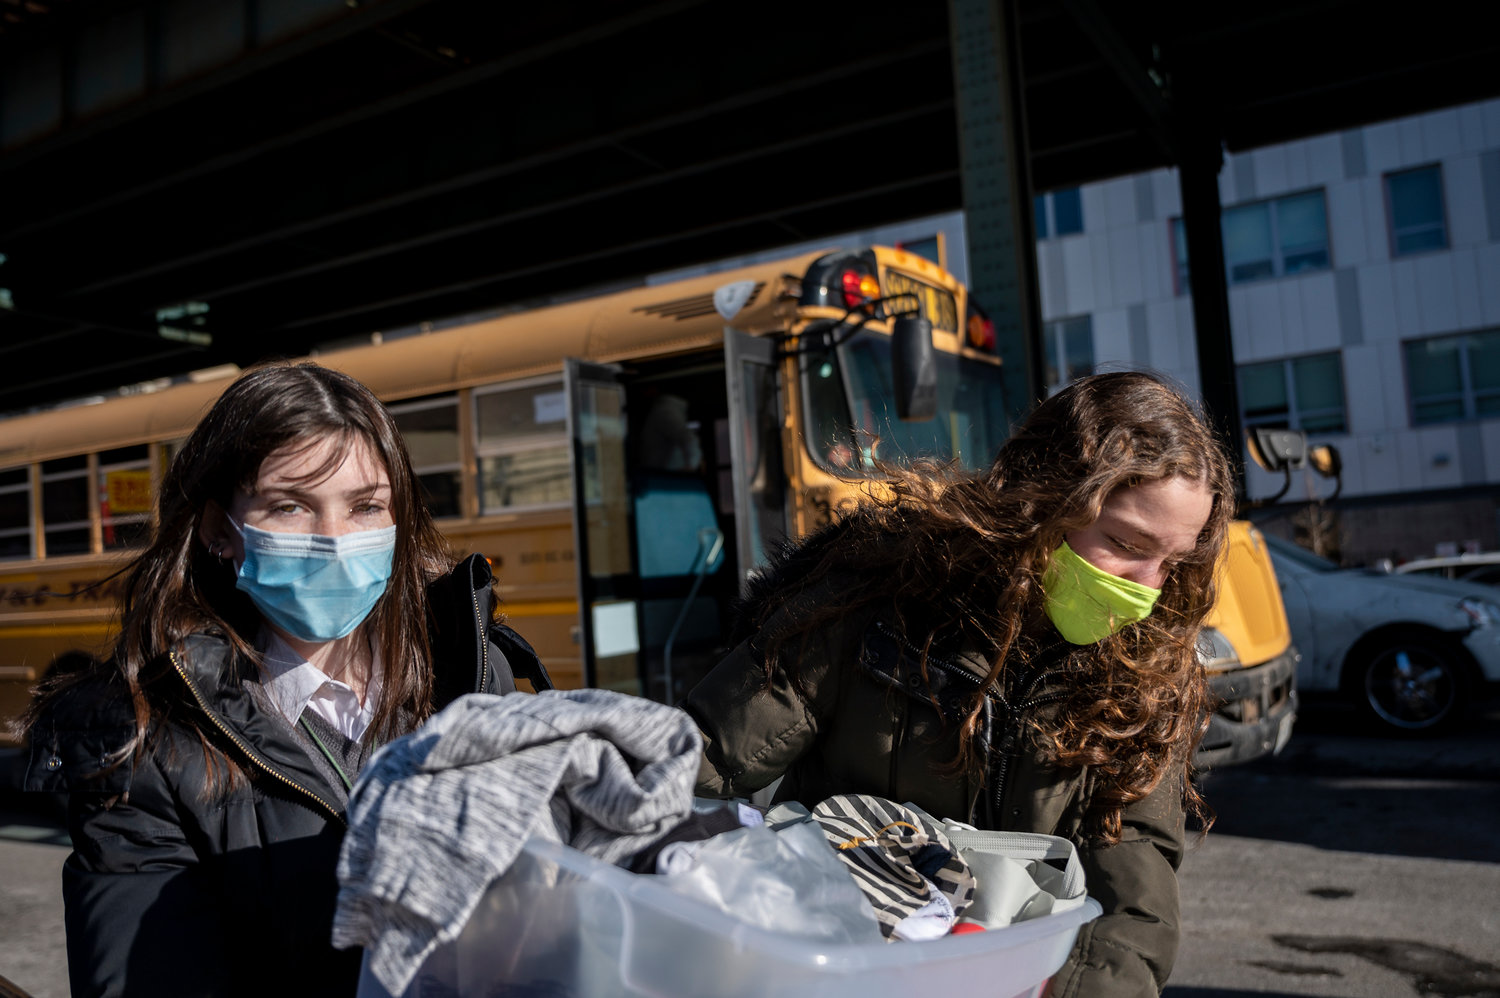 Students from SAR Academy took a bus to Monroe College on Jerome Avenue on Monday, with arms filled with supplies intended to help the displaced families of the Fordham Heights apartment building fire that killed 17, and seriously injured at least 32 more. The local effort was one of many that came together in the aftermath of the blaze, that includes not only supplies, but also more than $1 million in cash donations.